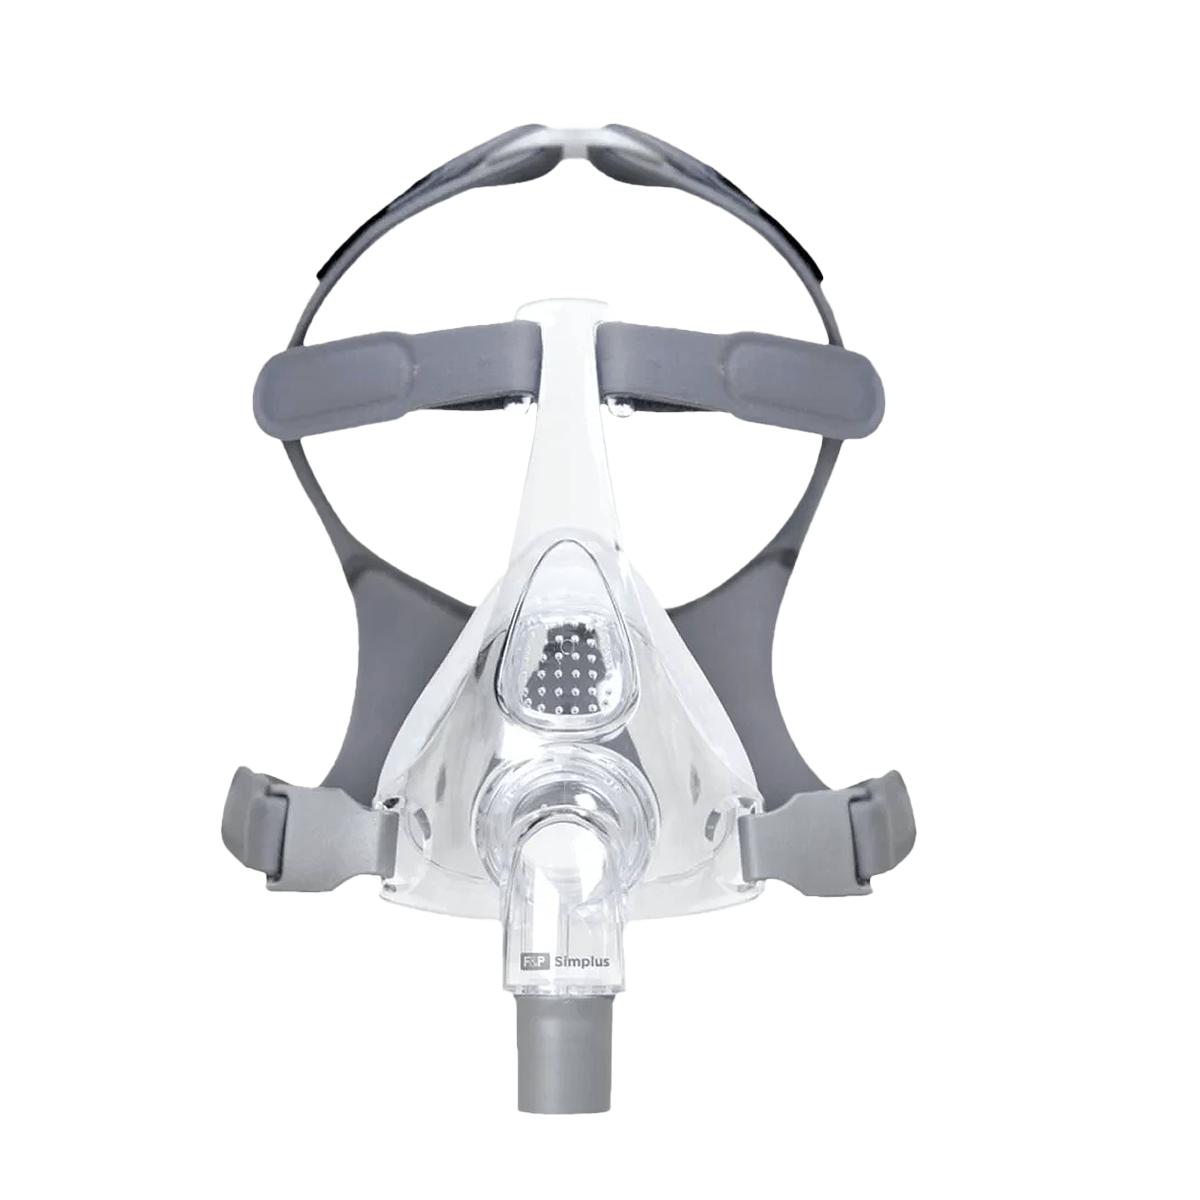  Simplus Full Face CPAP Mask with Headgear